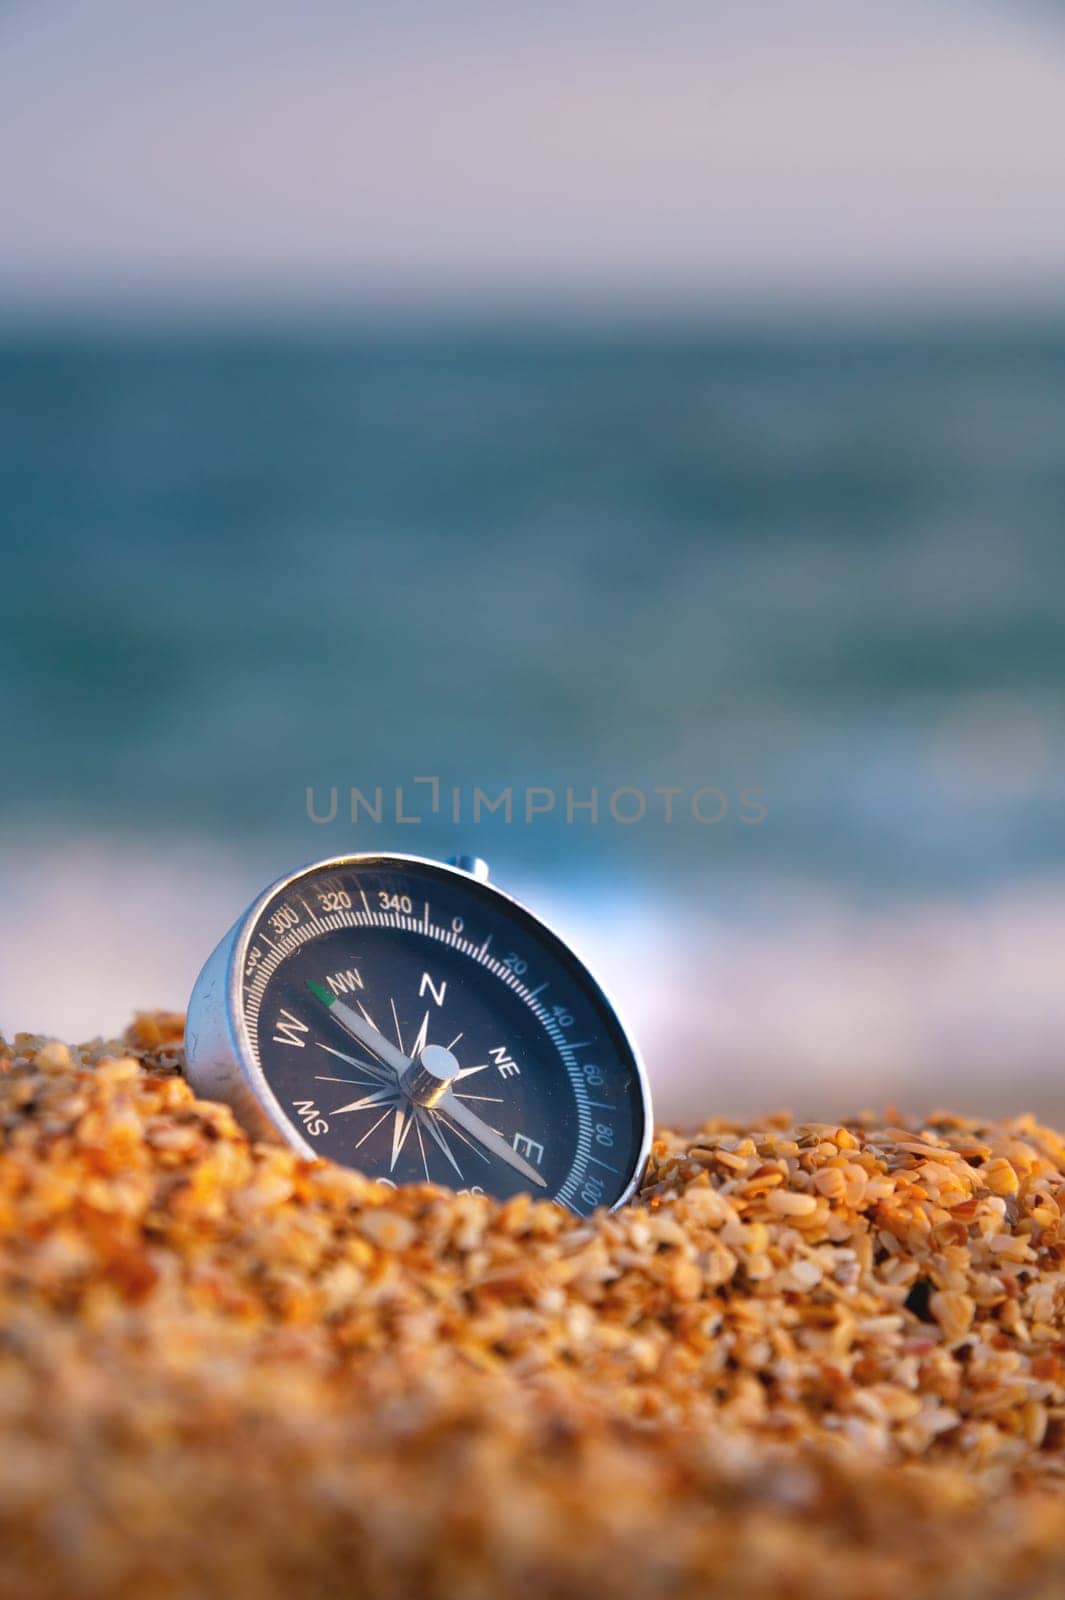 Conceptual photo, close-up of a compass lying in wet sand consisting of small crumbs of shells, against the backdrop of a blue calm sea by yanik88